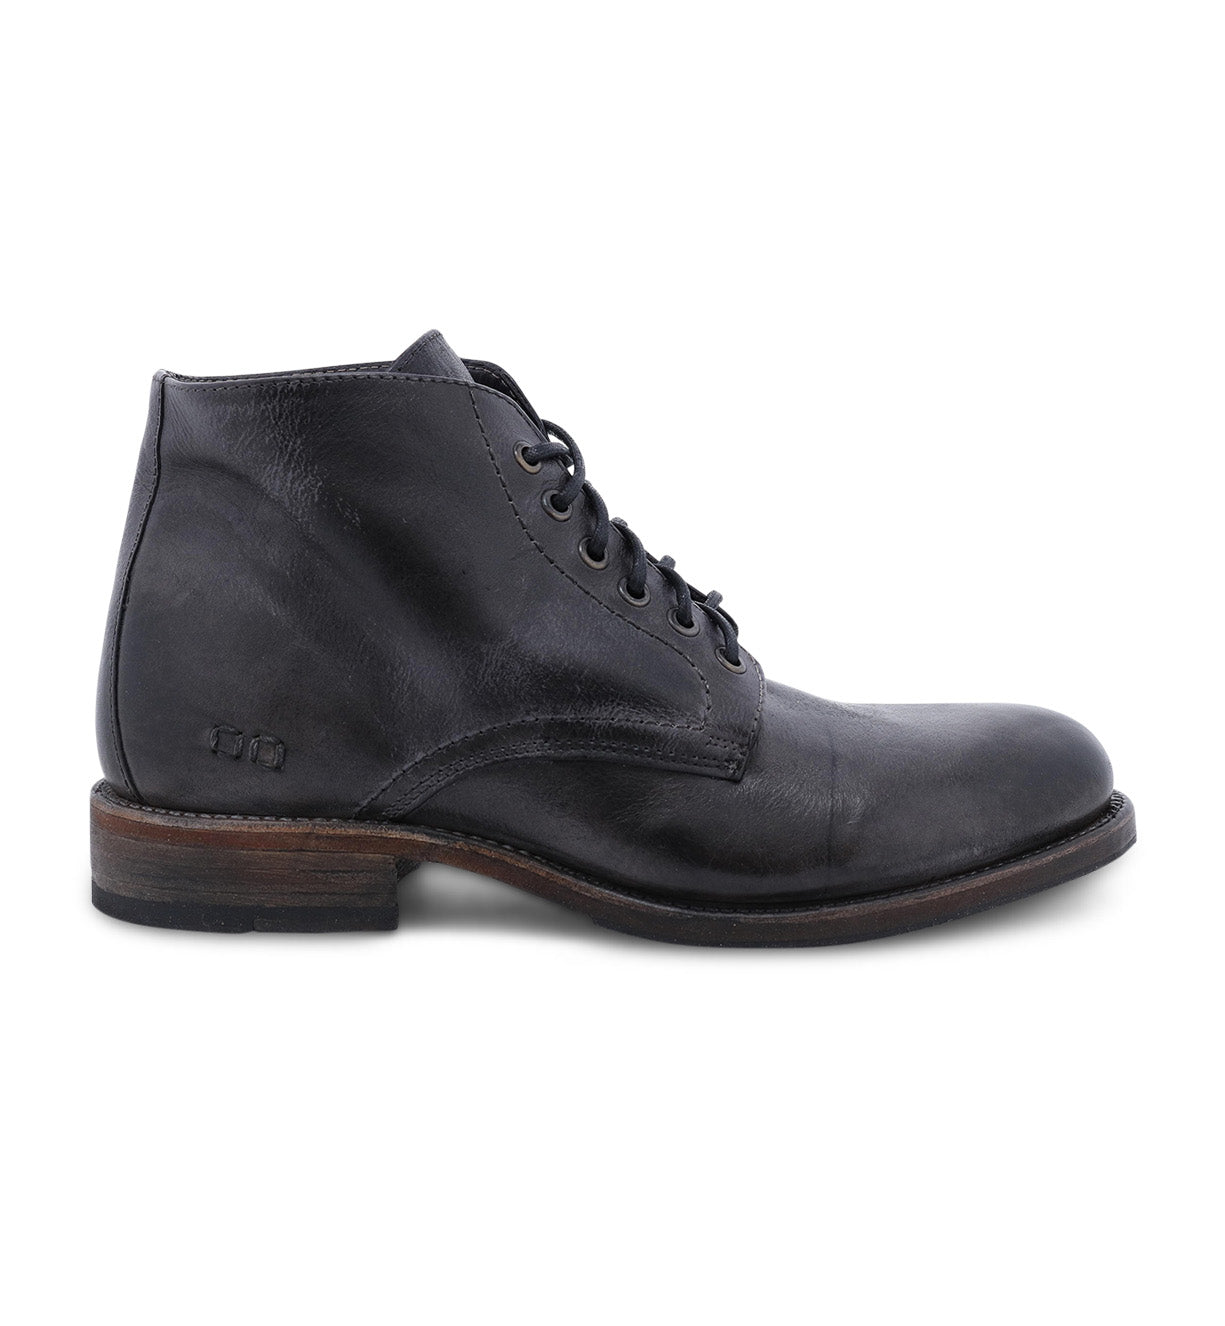 The men's Bed Stu Bradley black leather lace up boots.